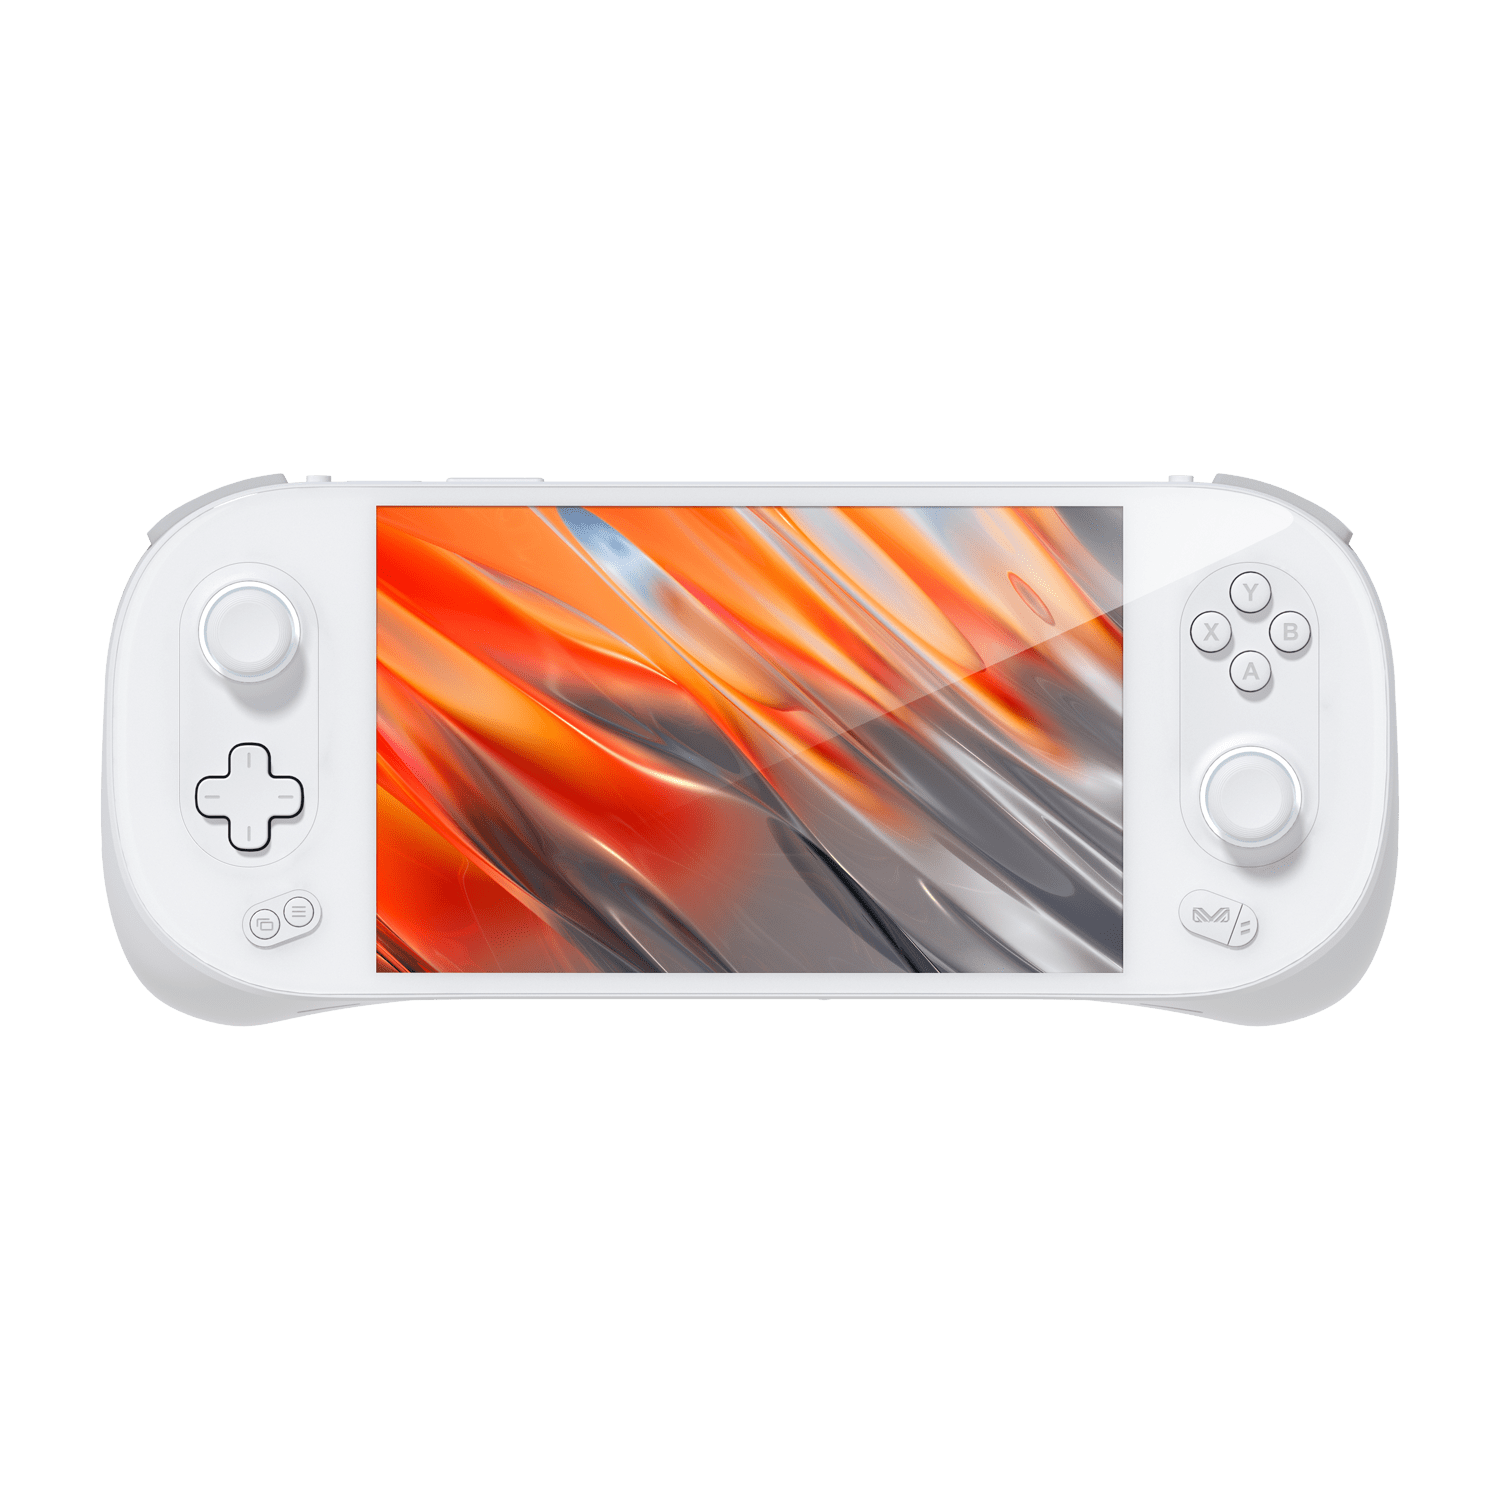 AYANEO 2 Sky White PC Gaming Handheld - Shown from the front